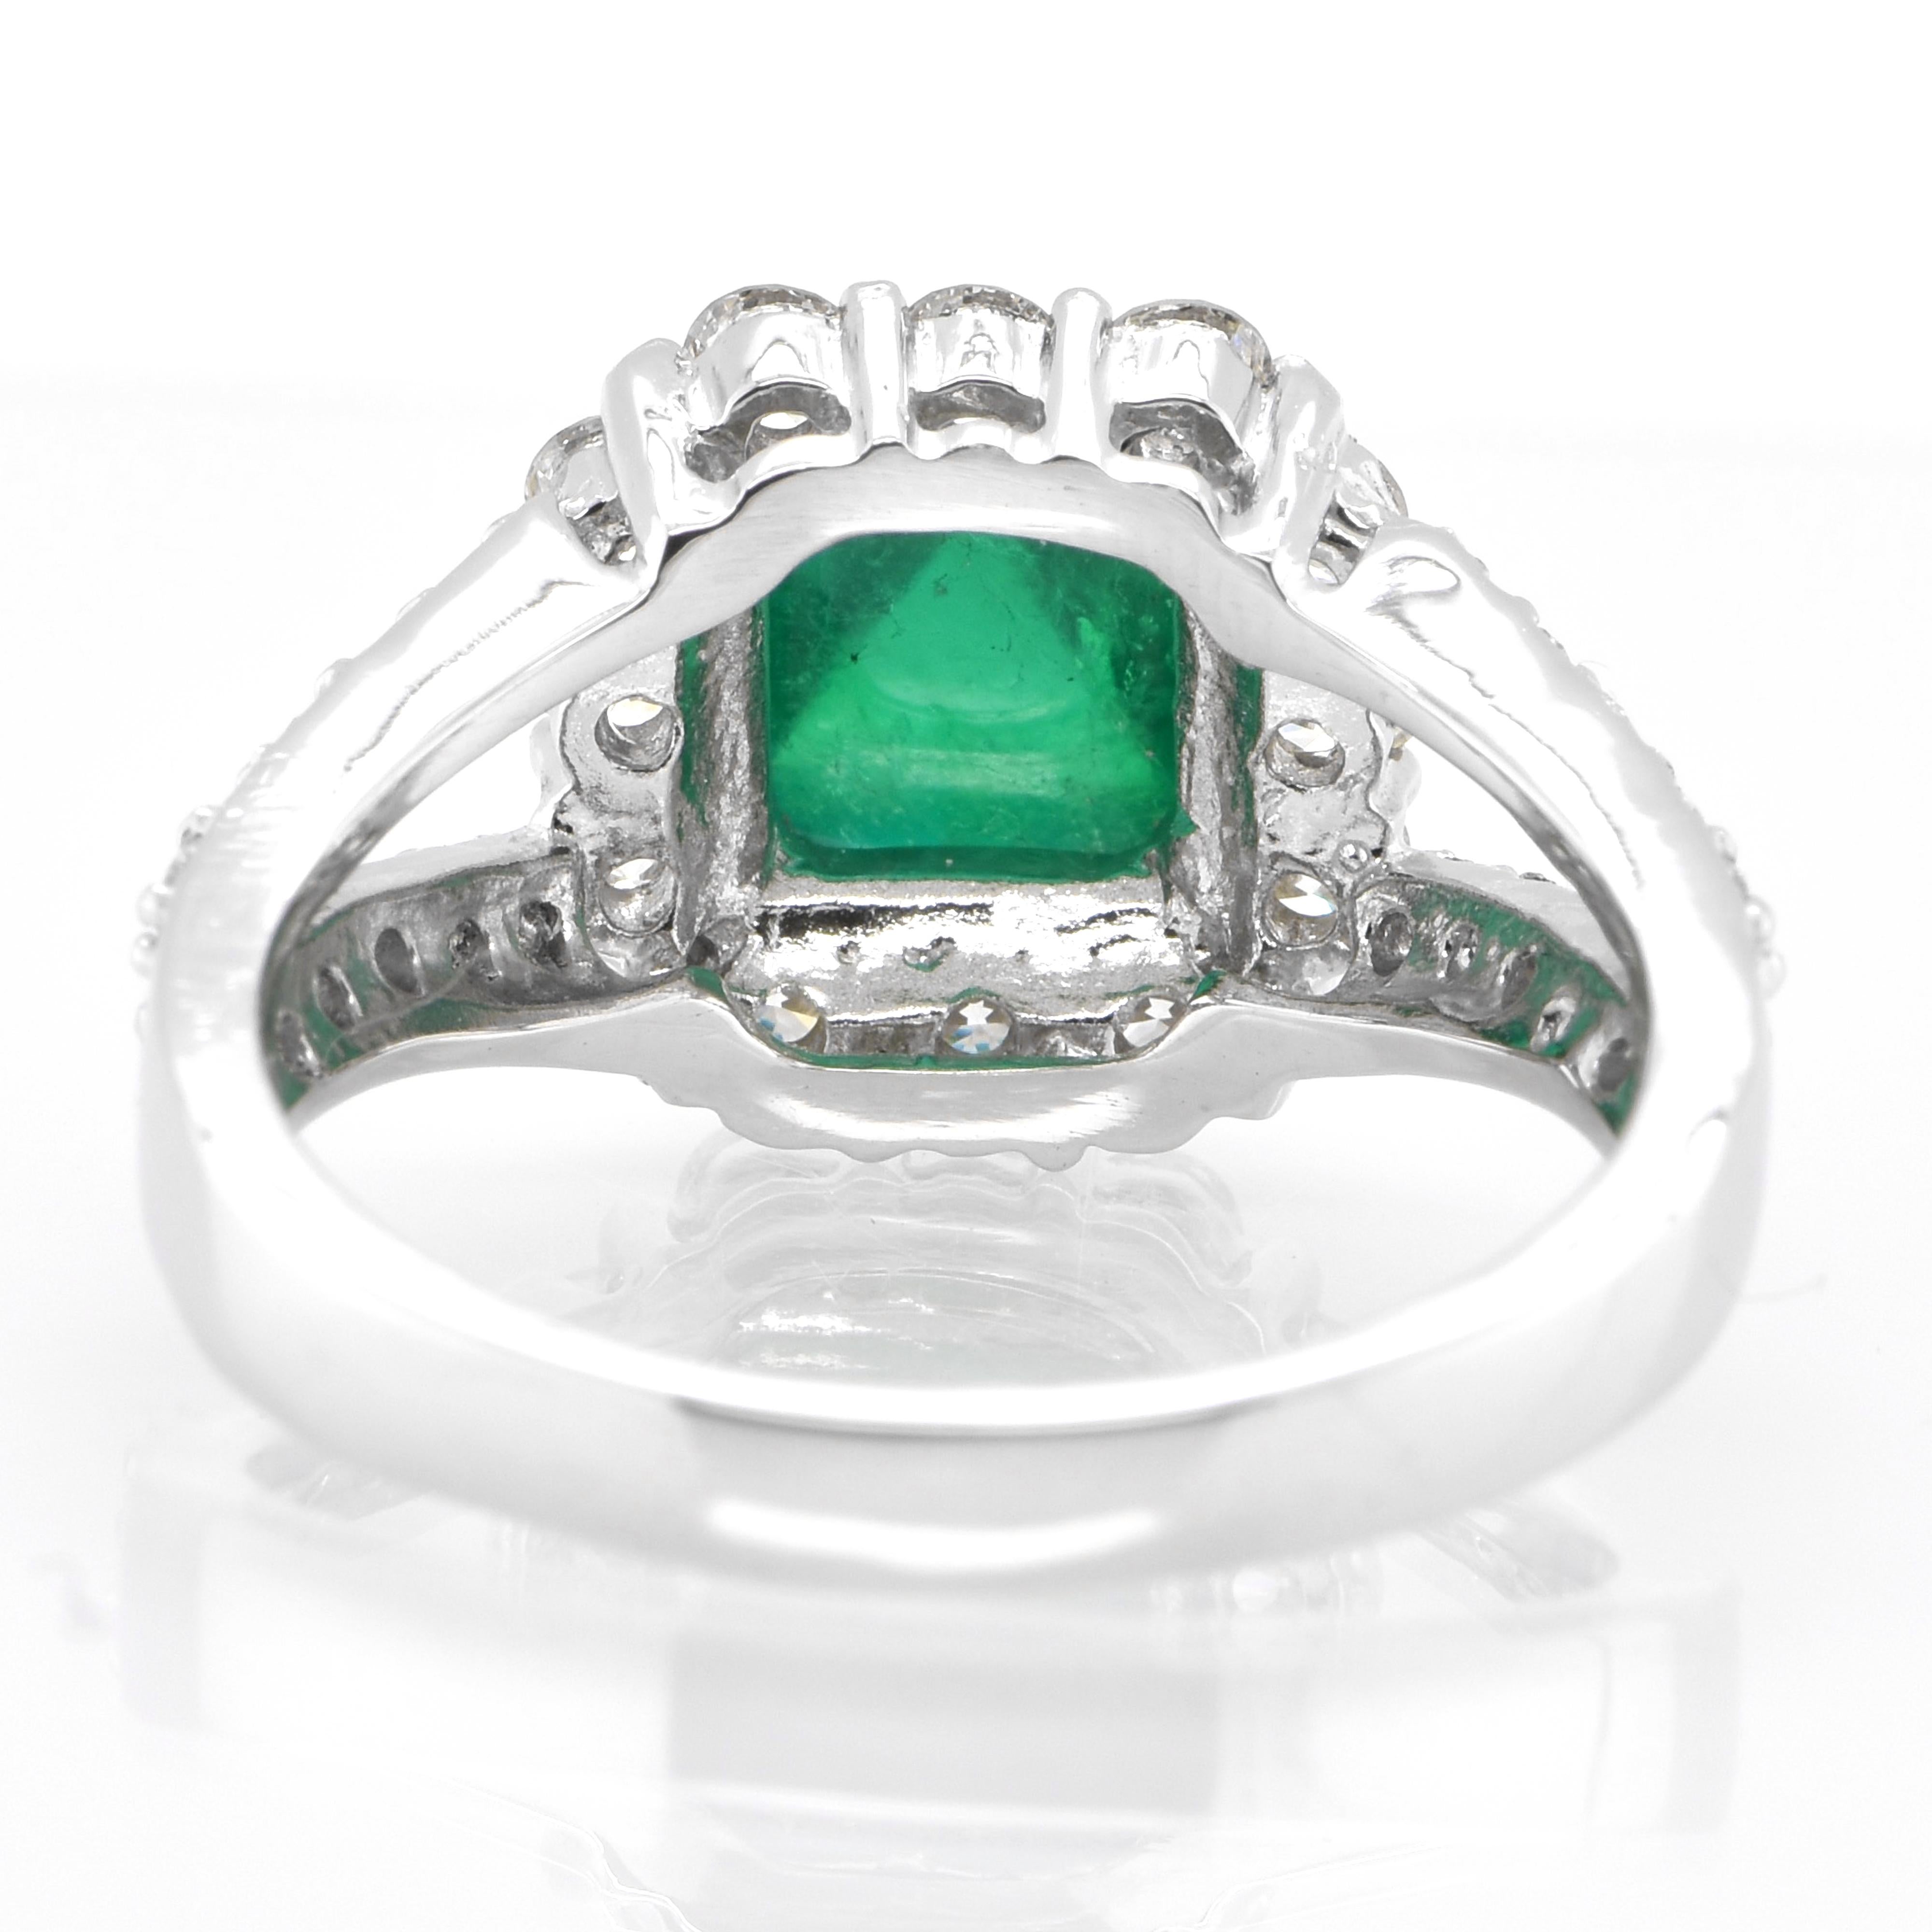 1.35 Carat Natural Emerald Sugarloaf Cabochon and Diamond Ring Set in Platinum For Sale 1